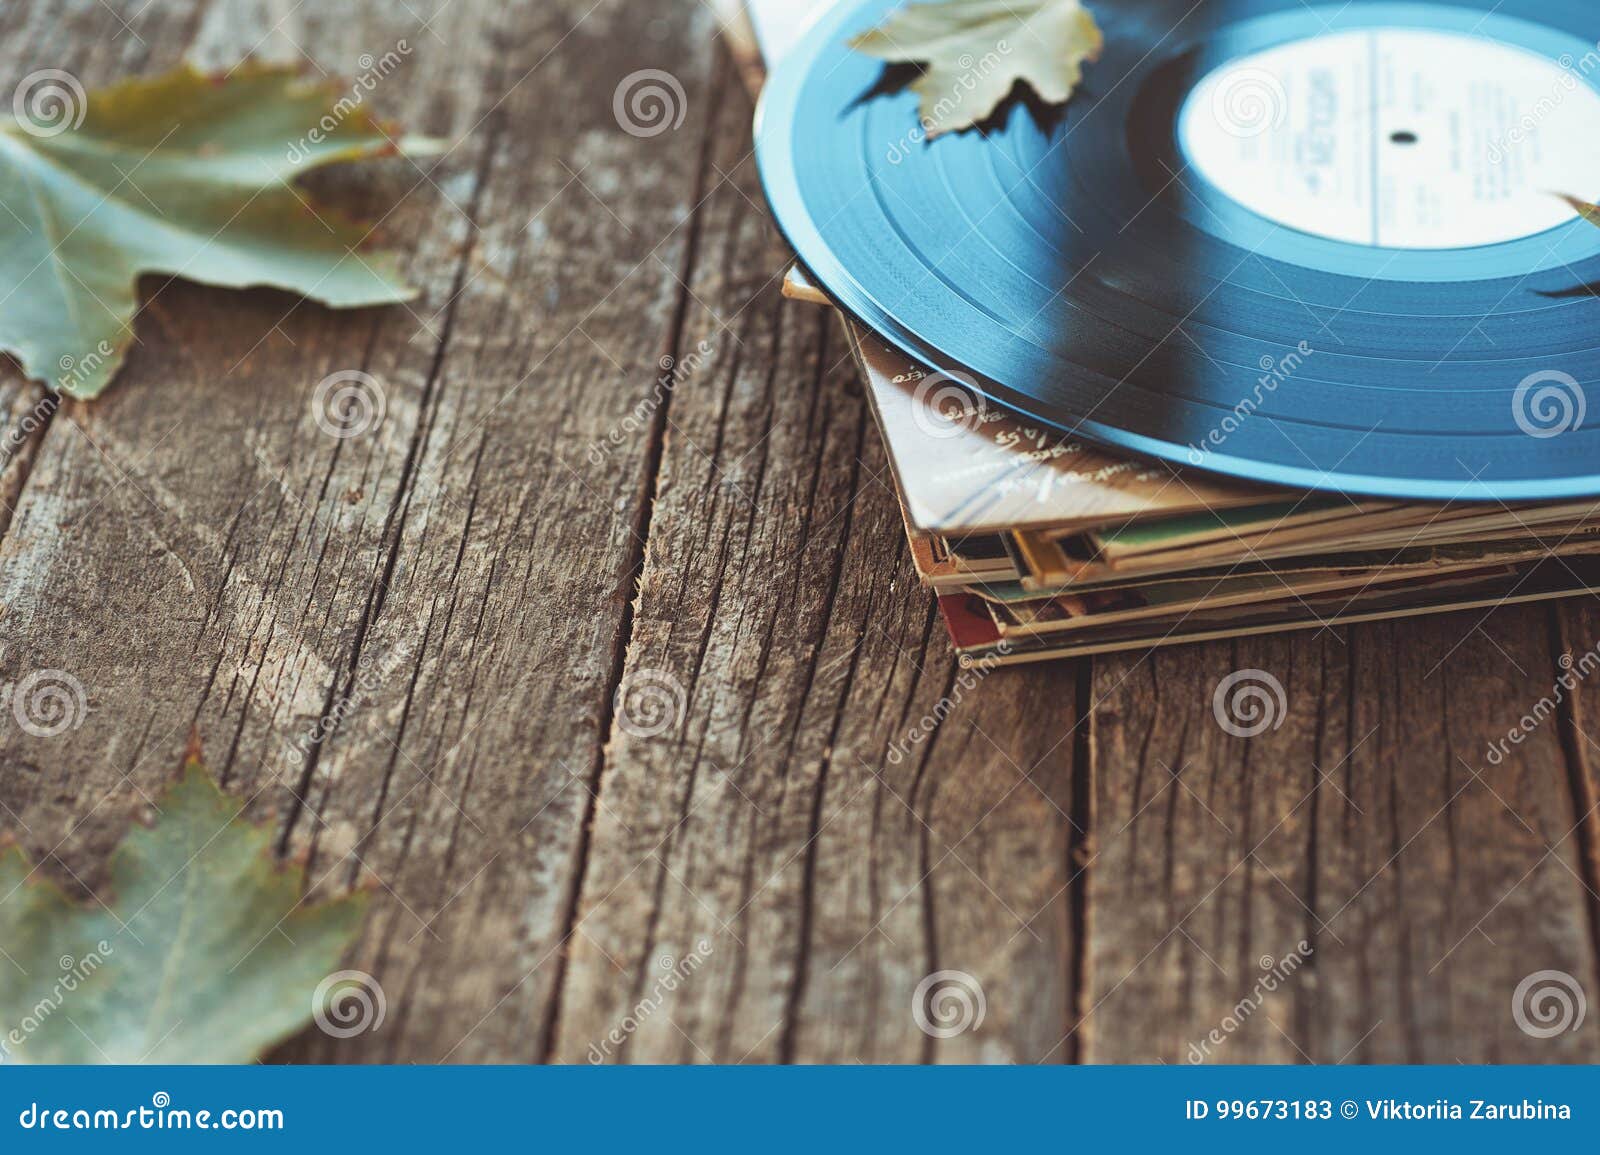 vintage old vinyl records on wooden autumn background, selective focus decorated with few leaves. music, fashion, texture,